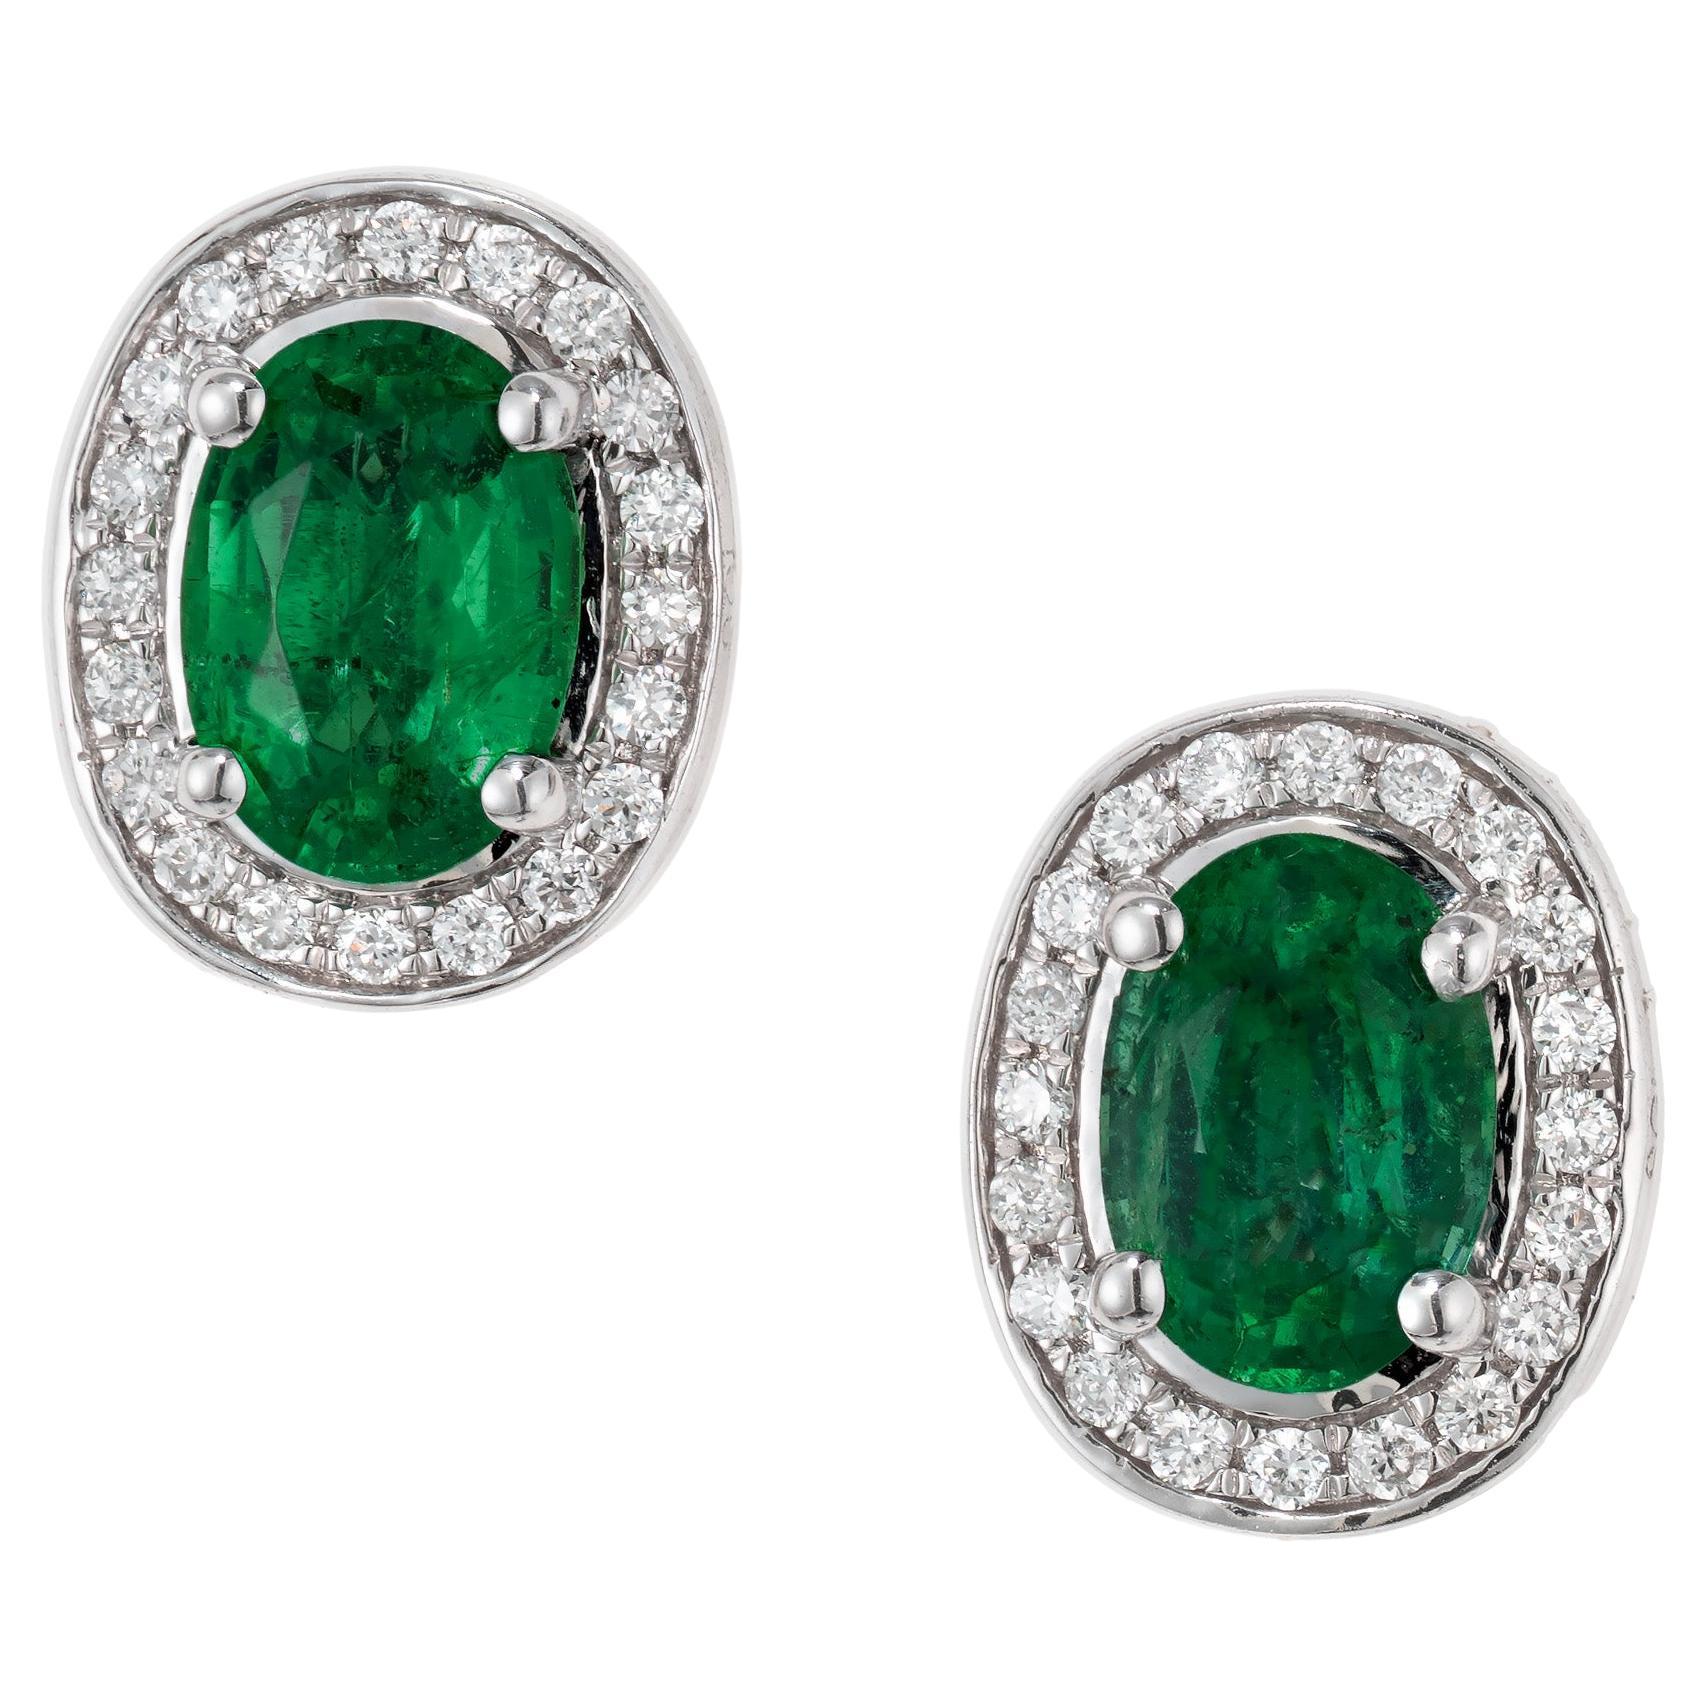 Peter Suchy GIA Certified 1.40 Carat Oval Emerald Diamond White Gold Earrings